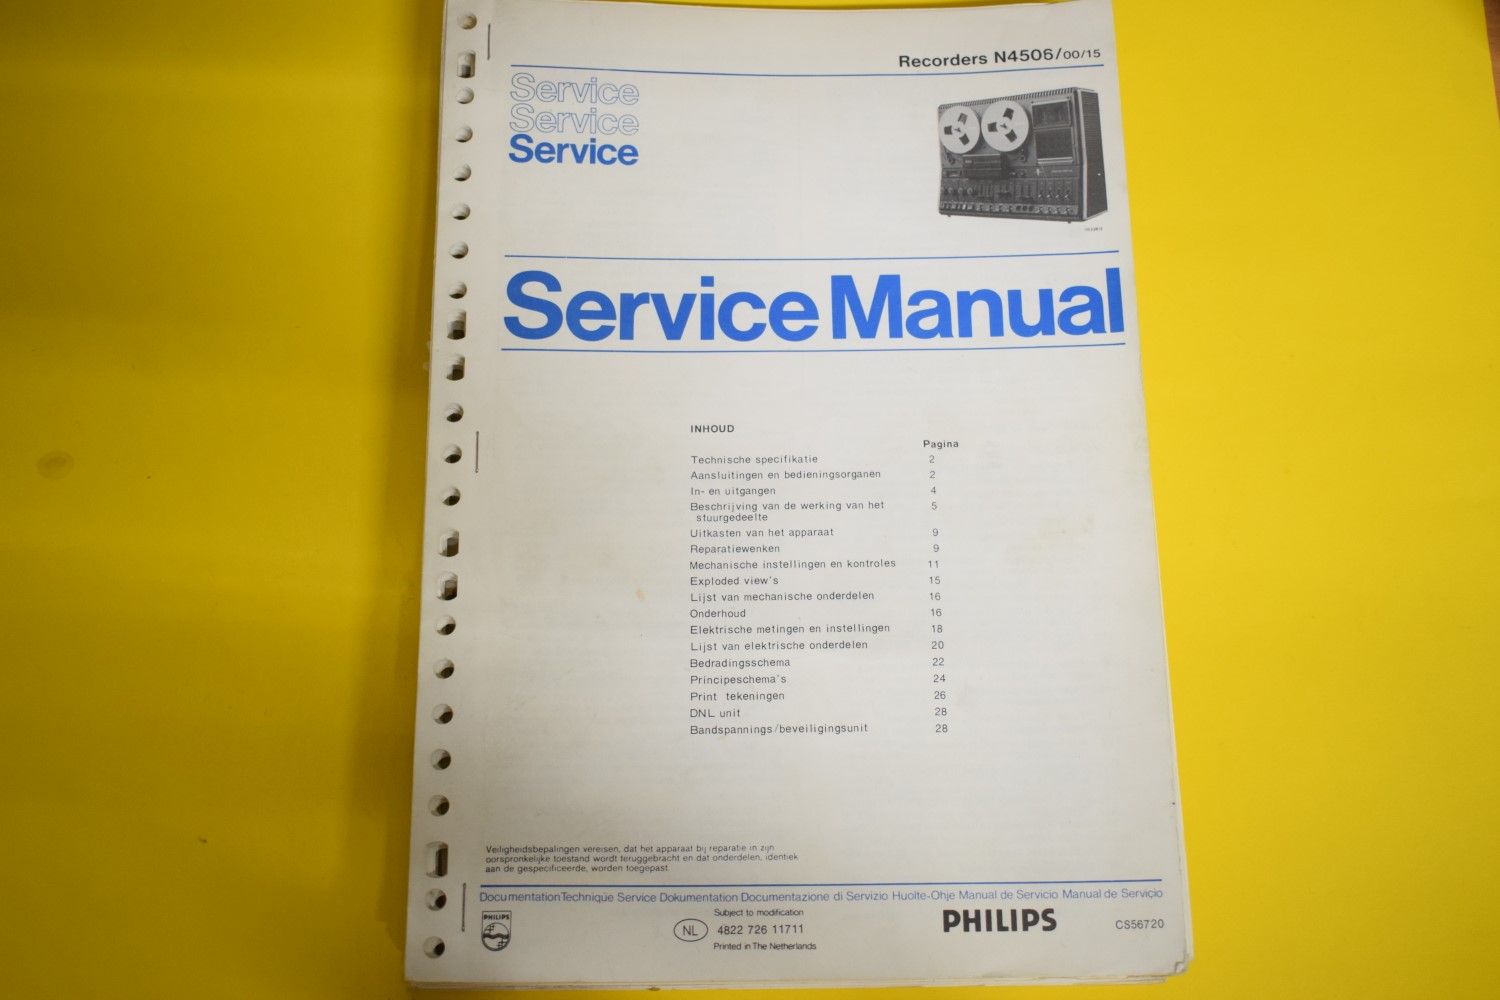 Philips N4506 Tape Recorder Service Manual – Dutch